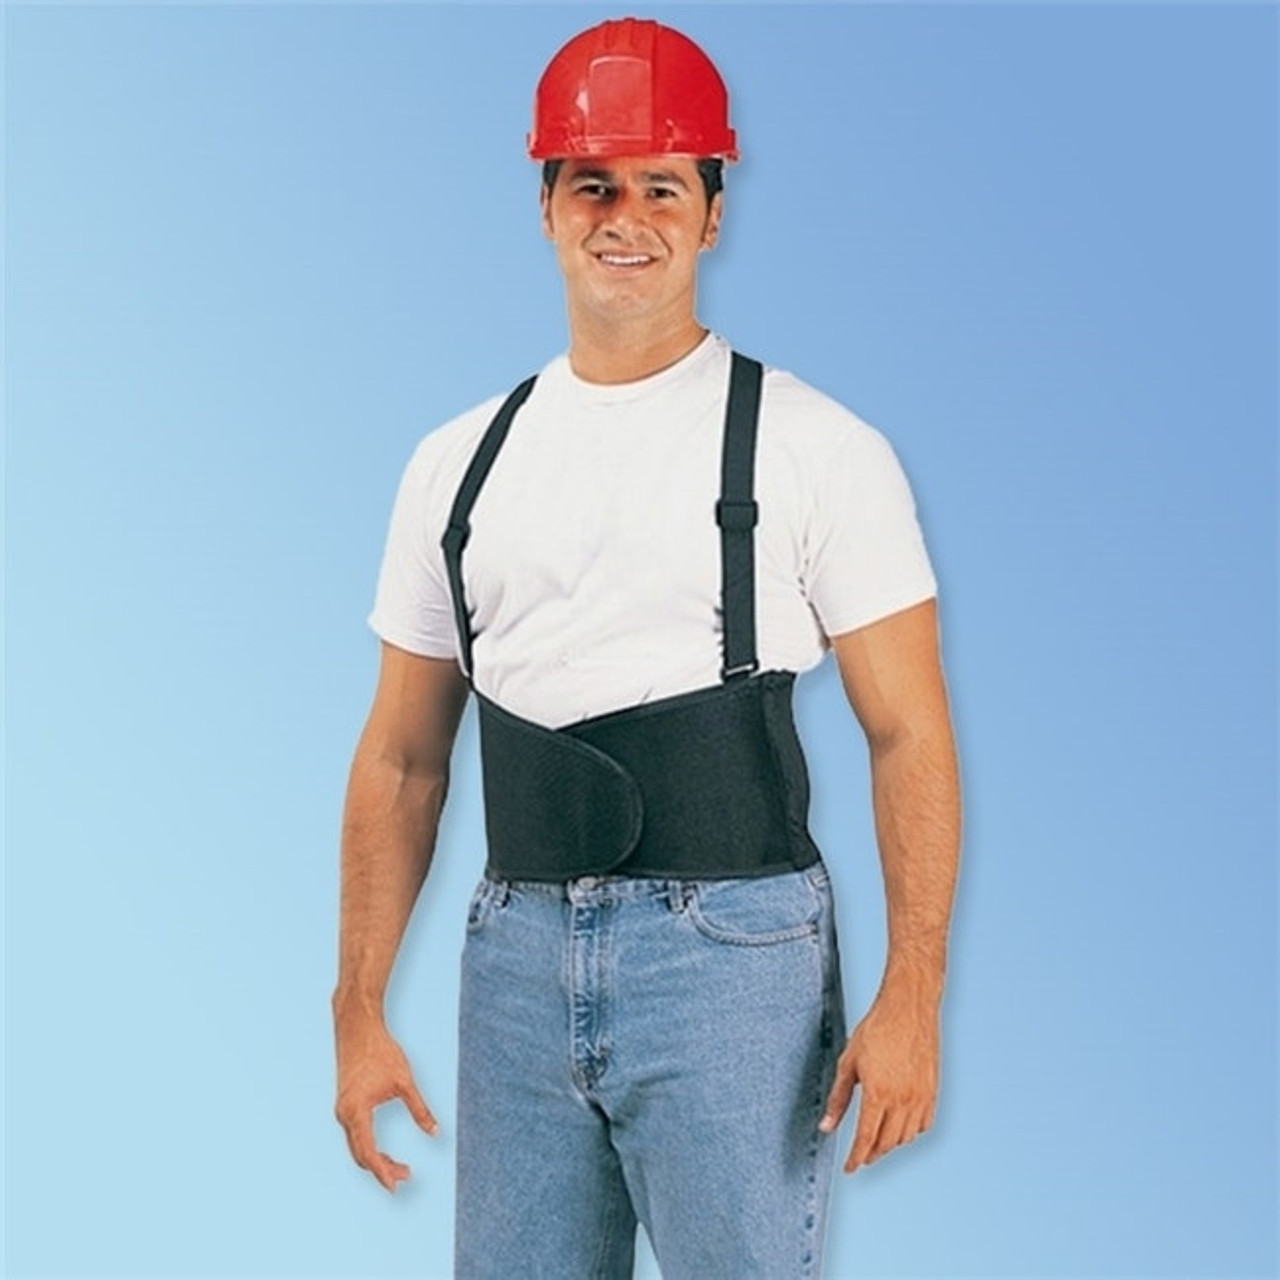 Save on Durawear 1908 Back Support Belts with Adjustable Suspenders